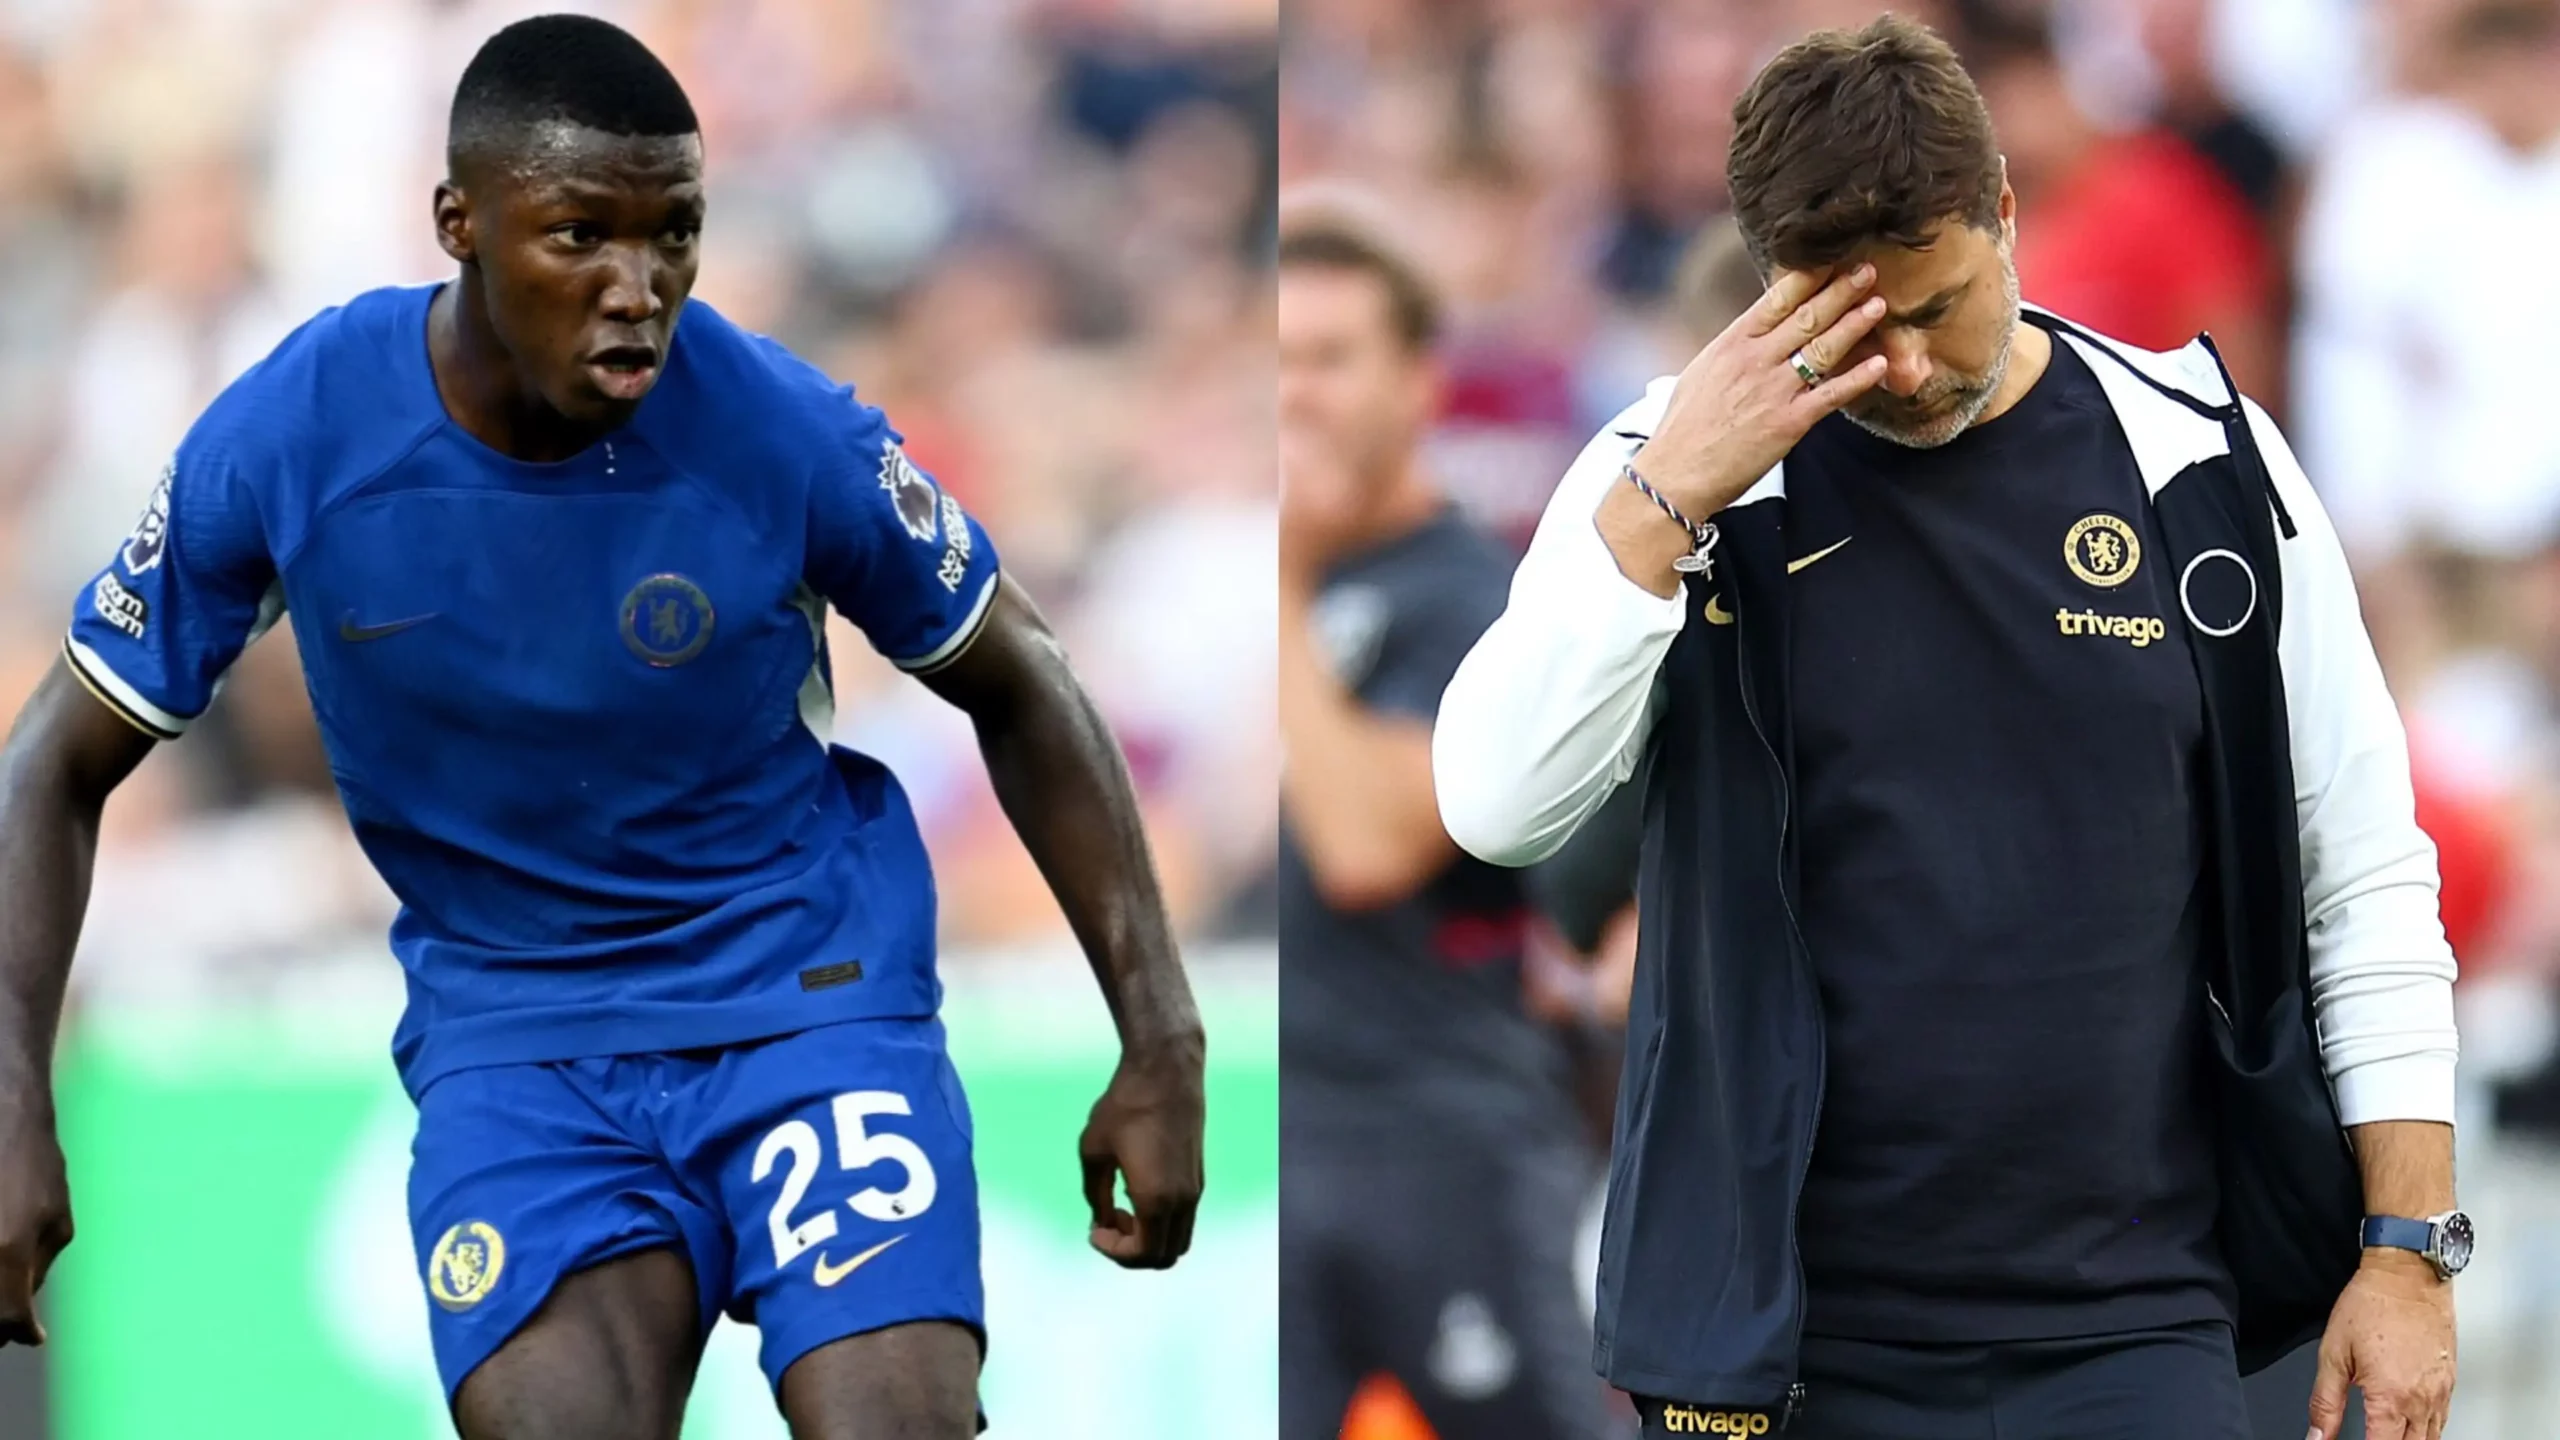 Match Analysis : See Chelsea Player Ratings Against West Ham United